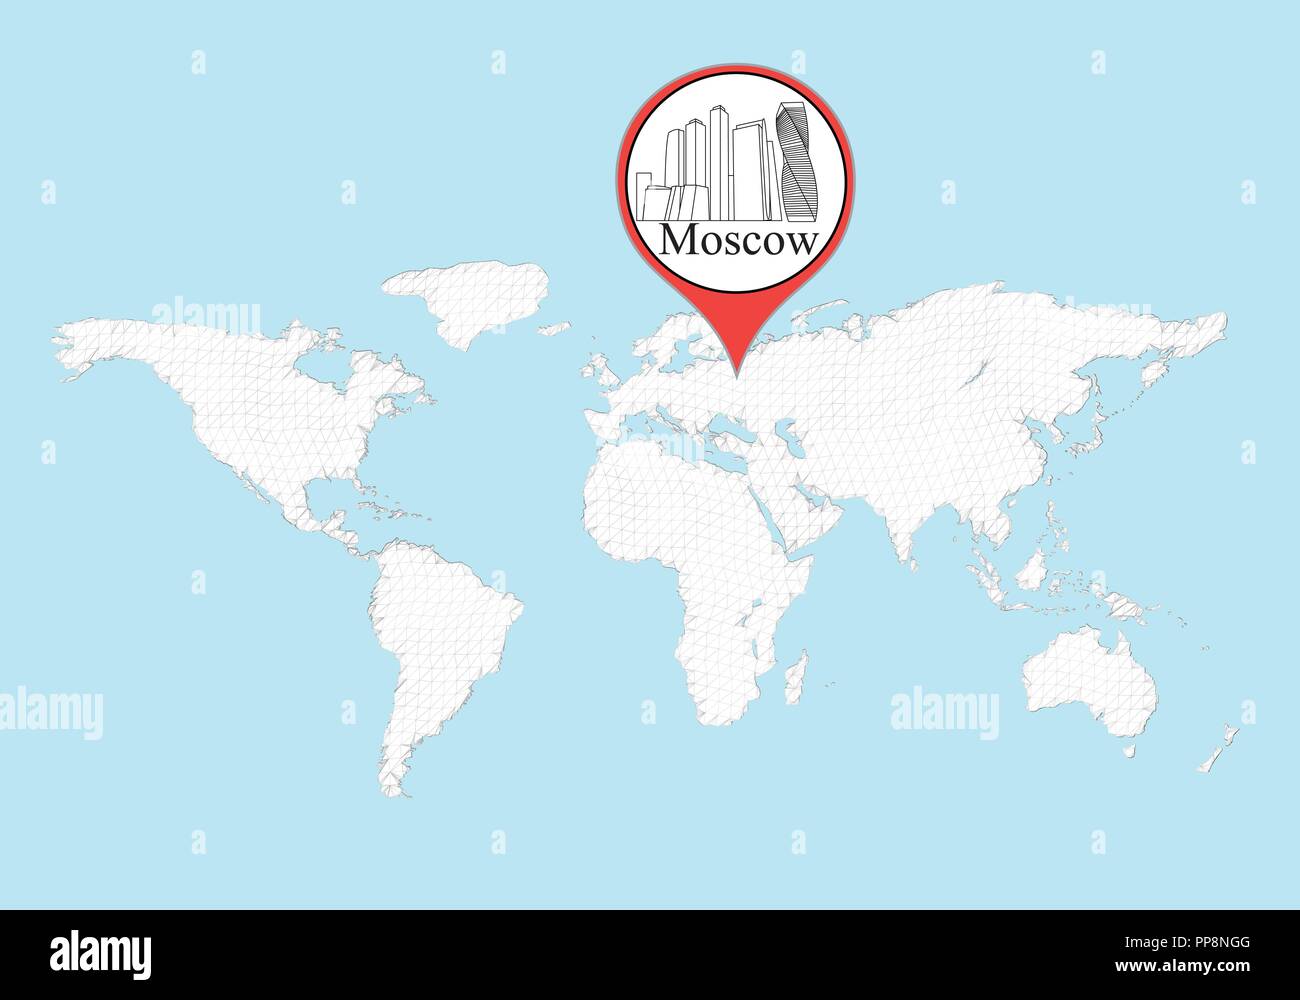 Moscow On The World Map The City Of Moscow In The Outlines Is